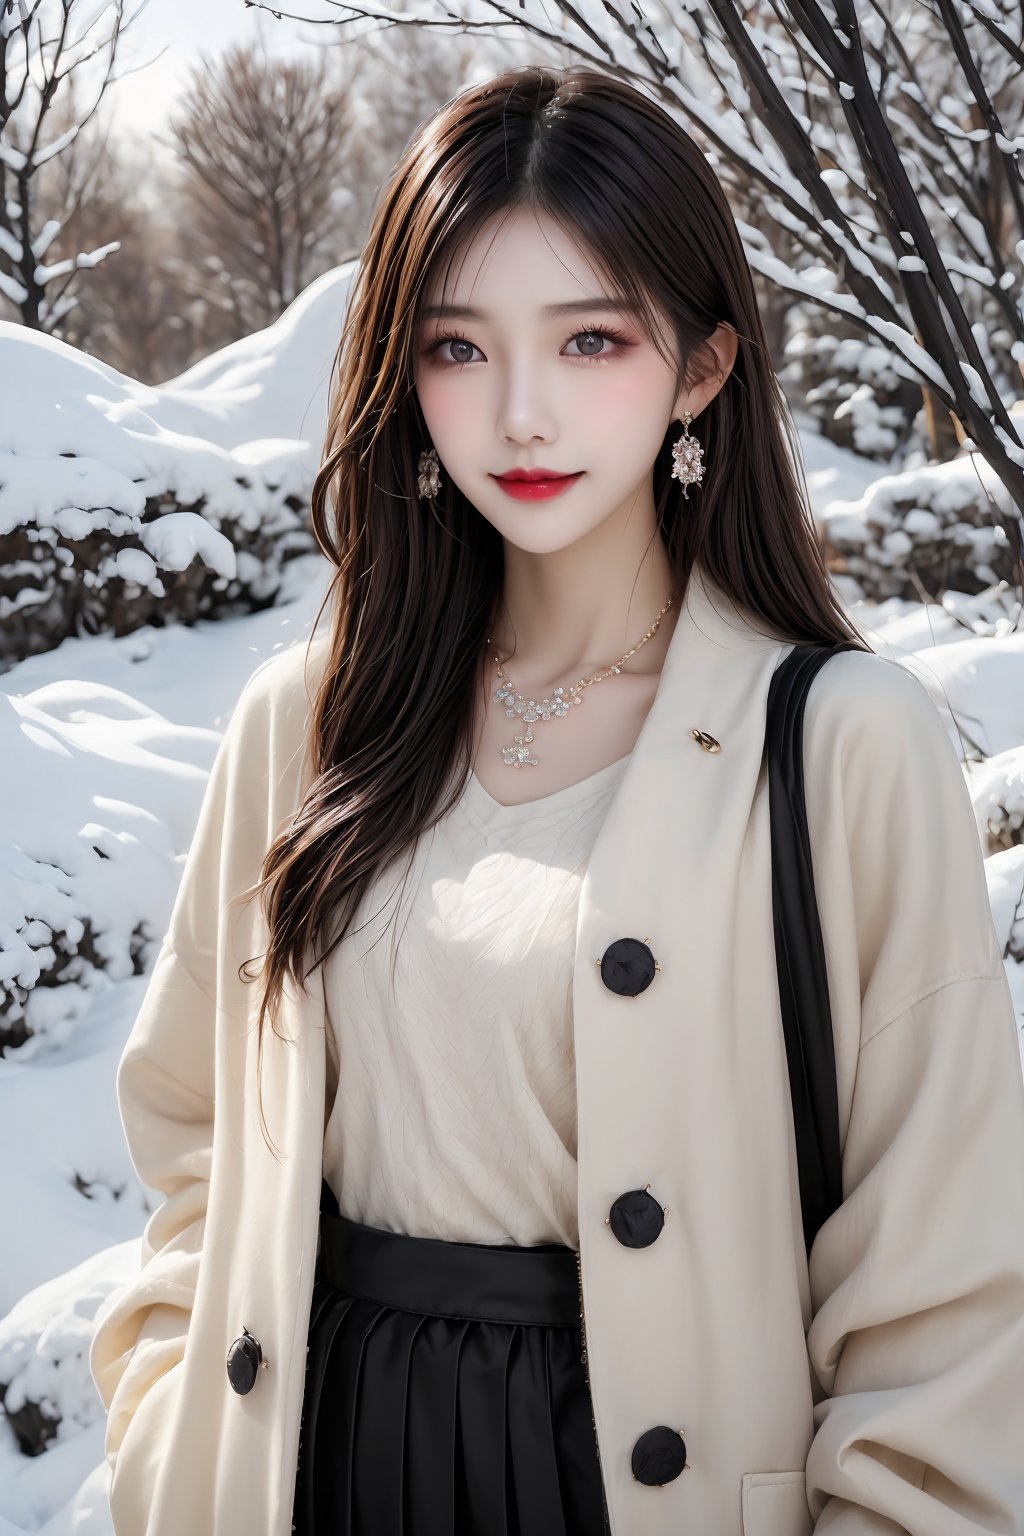 In a softly lit winter wonderland scene, a stunning Korean girl, Woman 1, stands out against the snowy backdrop. Her dreamy gaze, framed by luscious black hair with subtle bangs, is accentuated by big, bright smile and slightly upturned lips, painted with dark red lipstick. Her pale skin and delicate facial features are rendered in ultra-fine detail, showcasing perfect anatomy. A beautiful necklace and small earrings adorn her neck, while a handbag and winter down parka add a touch of elegance to her outfit. The overall effect is one of extreme delicacy, beauty, and realism, as if captured from an 8K art photo.,uniform11,Beautiful Asian girls ,girl